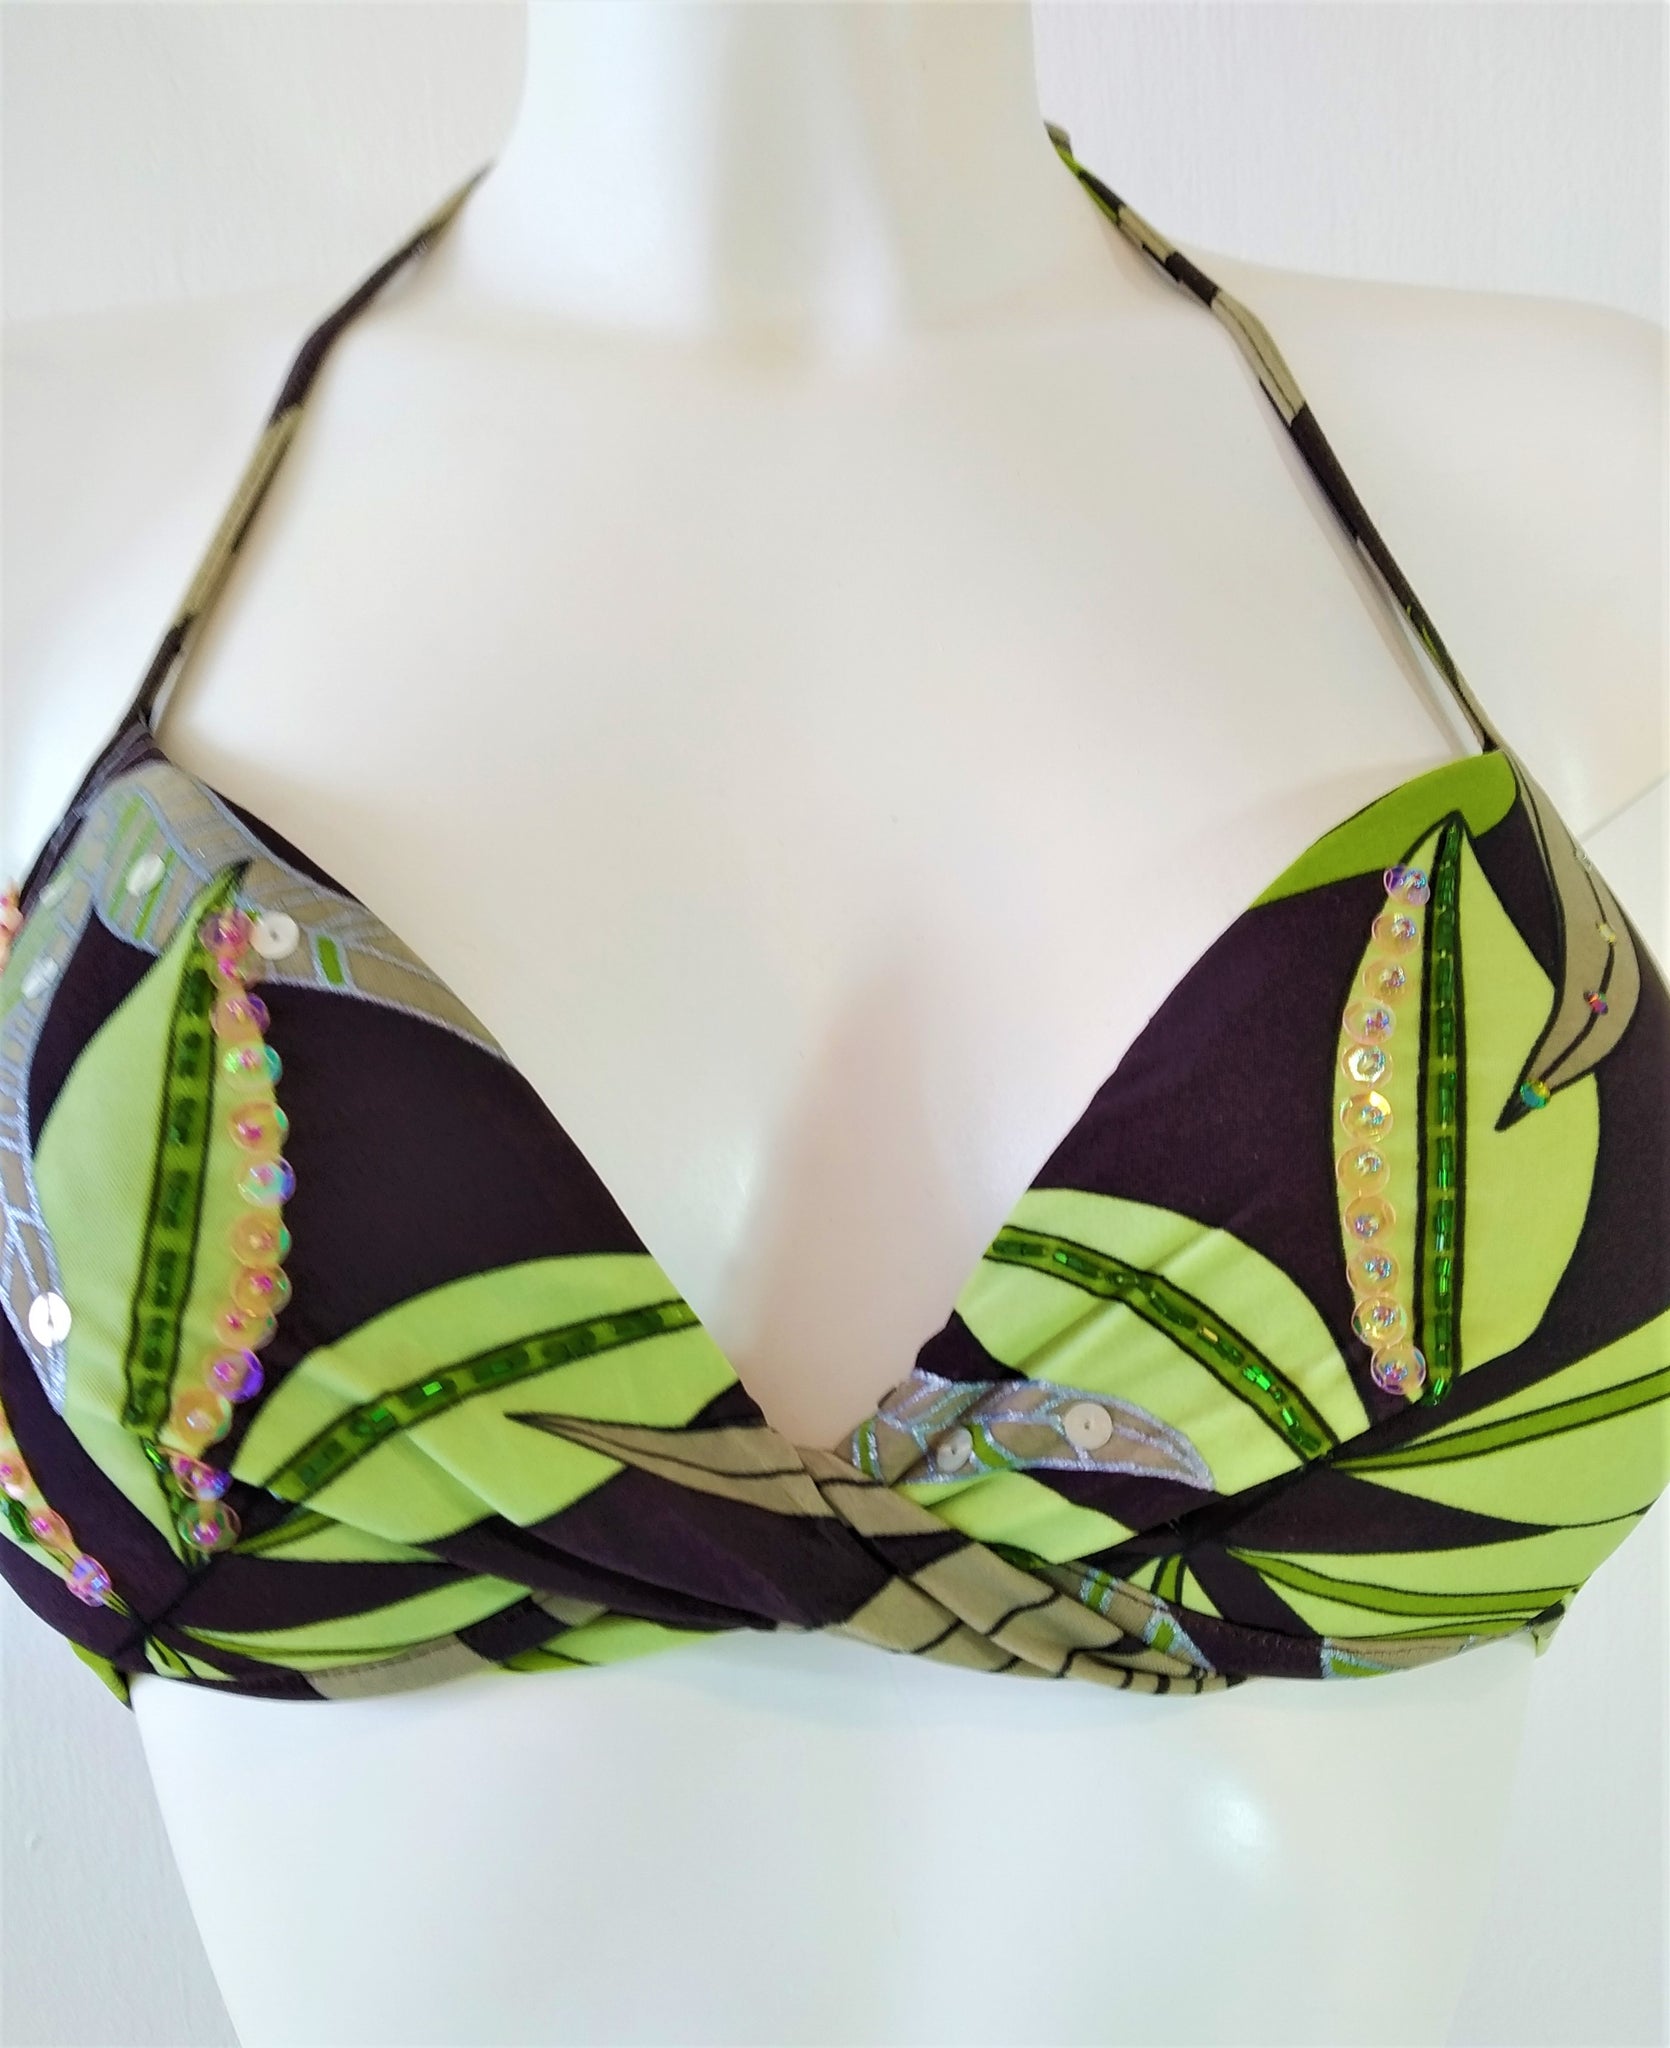 Push-up bikini bra with print of  green leaves on brown background Embellishment: hand work of embroidered beads and sequins. bikinn.com